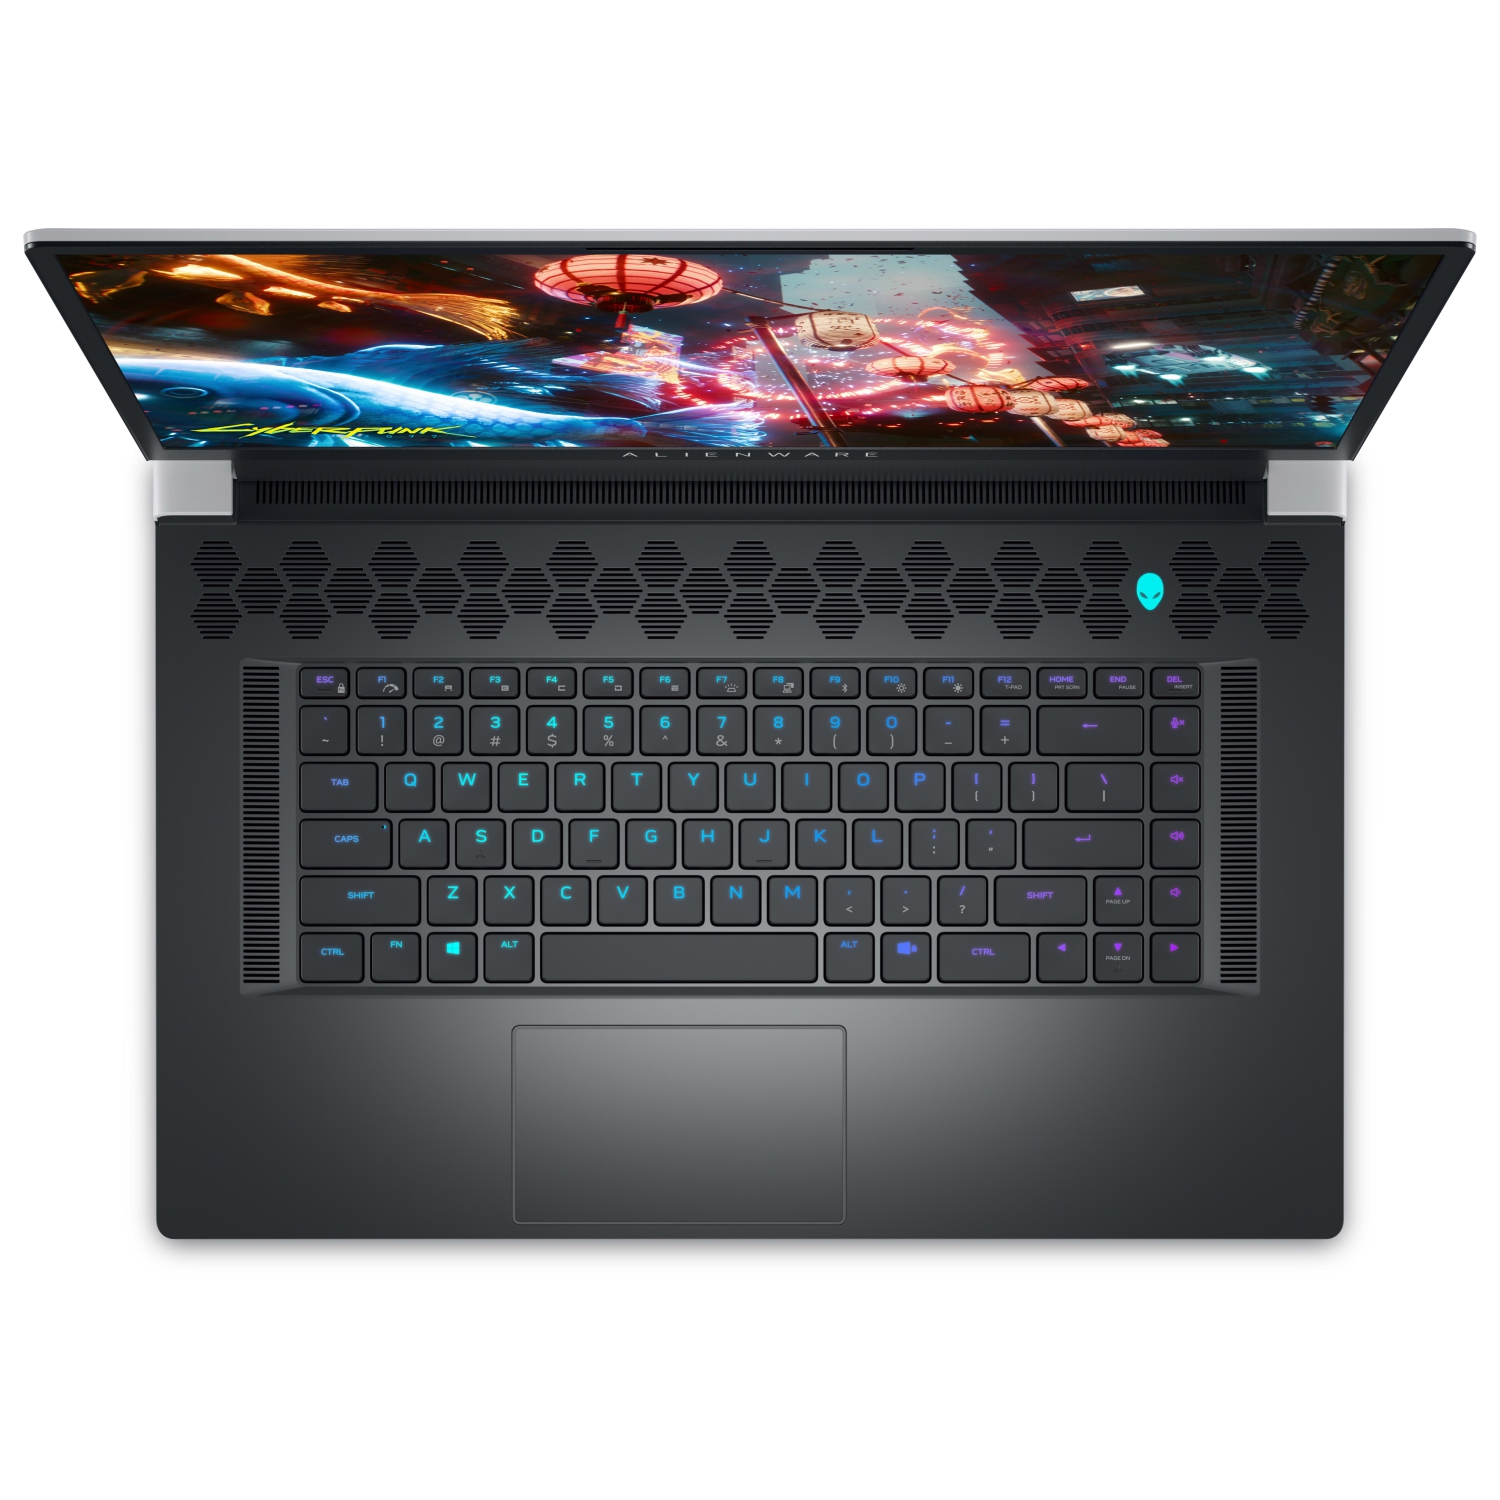 Refurbished (Excellent) – Dell Alienware X17 R2 Gaming Laptop (2022) | 17.3" 4K | Core i7 - 1TB SSD - 32GB RAM - RTX 3060 | 14 Cores @ 4.7 GHz - 12th Gen CPU - 6GB GDDR6